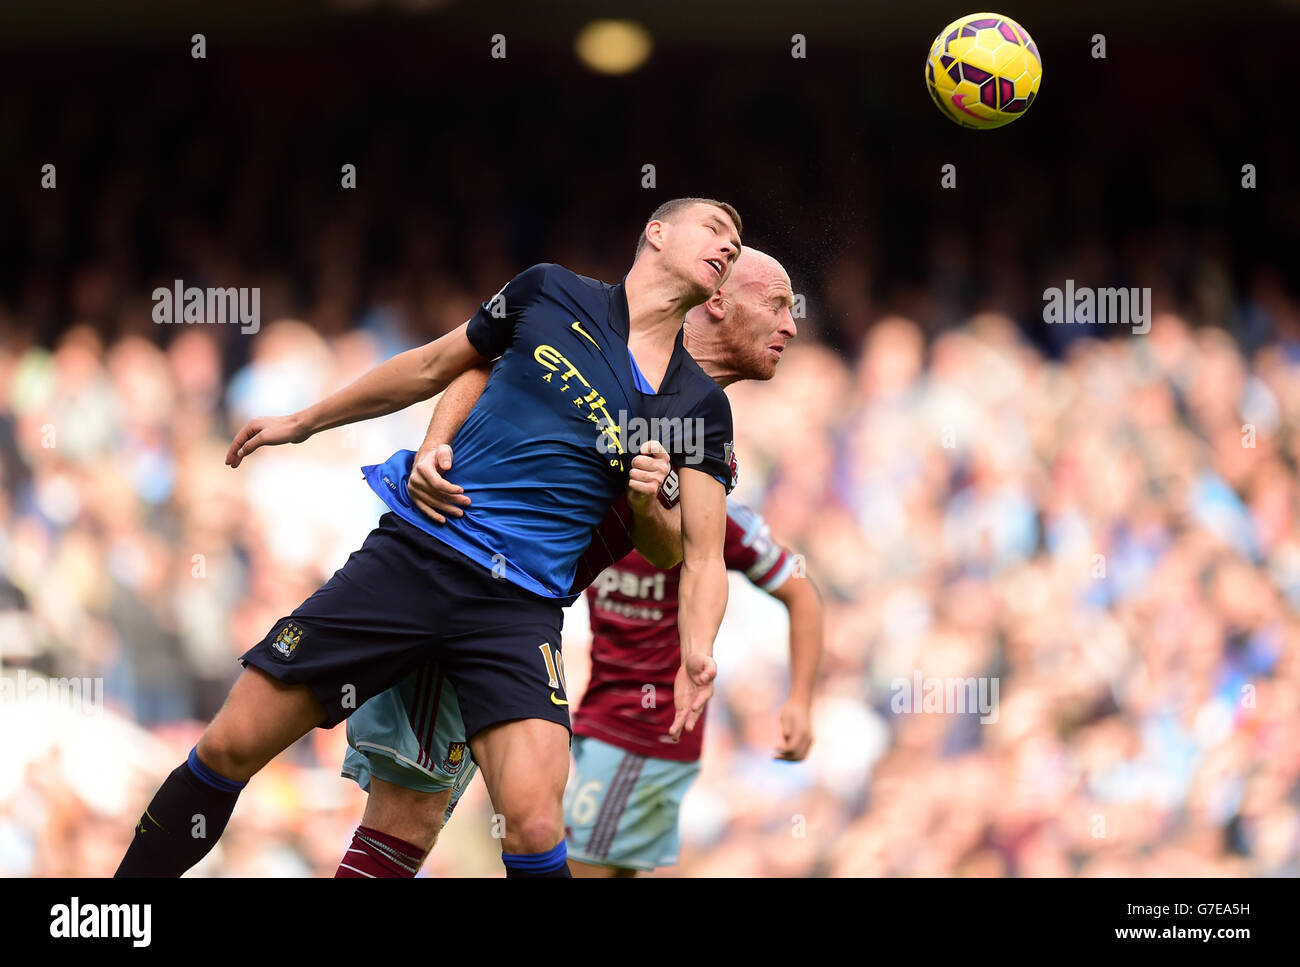 West Ham United's James Collins (right) and Manchester City's Edin Dzeko (left) battle for the ball in the air Stock Photo